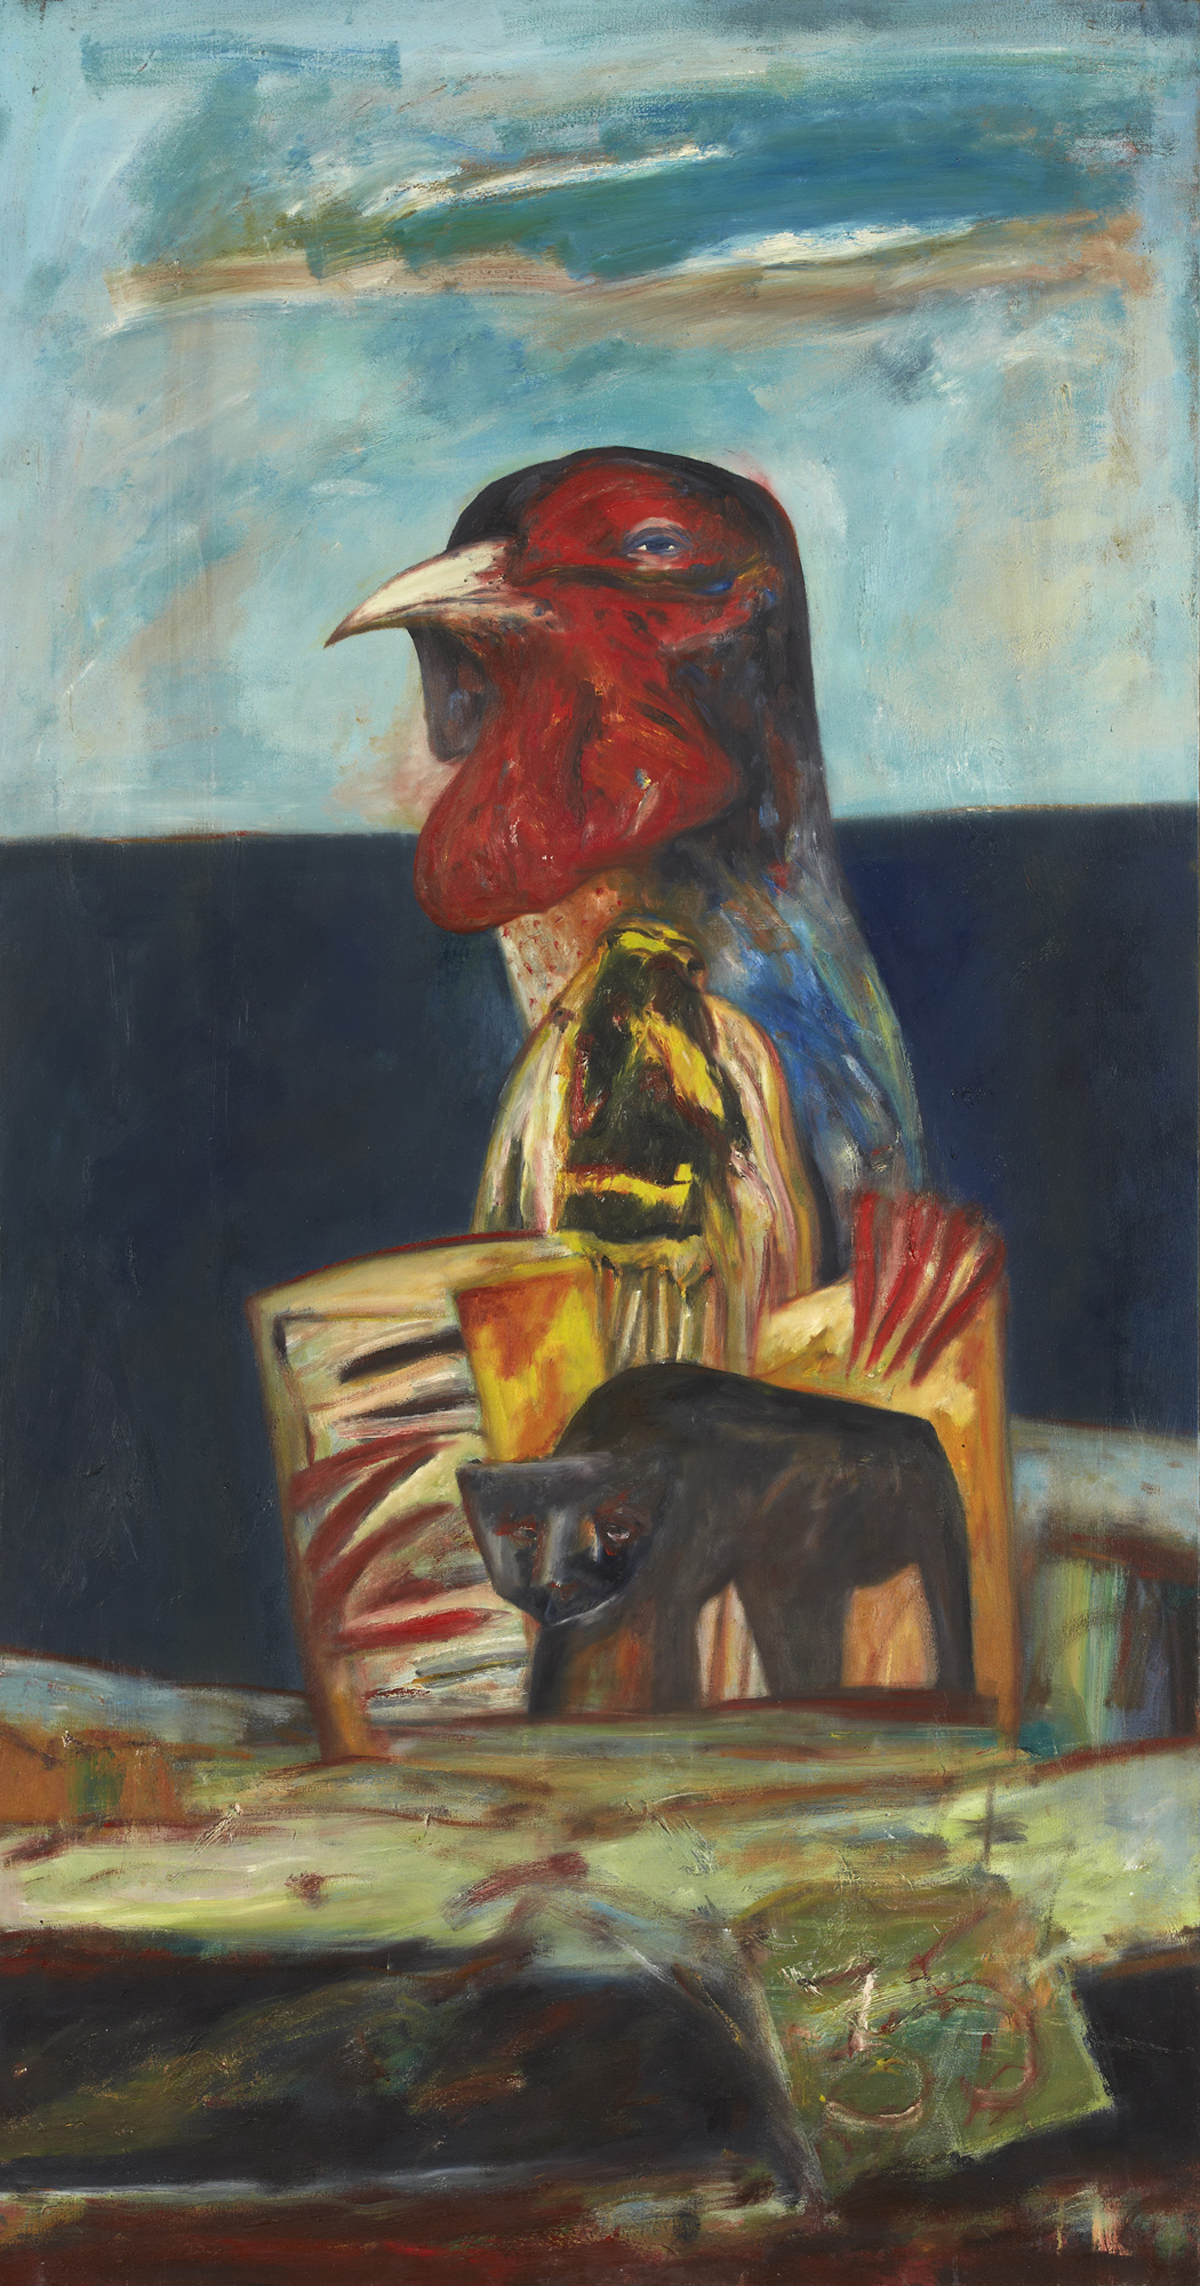 You're 35 Today John (1977), Oil on Canvas, 70.5 x 37 inches